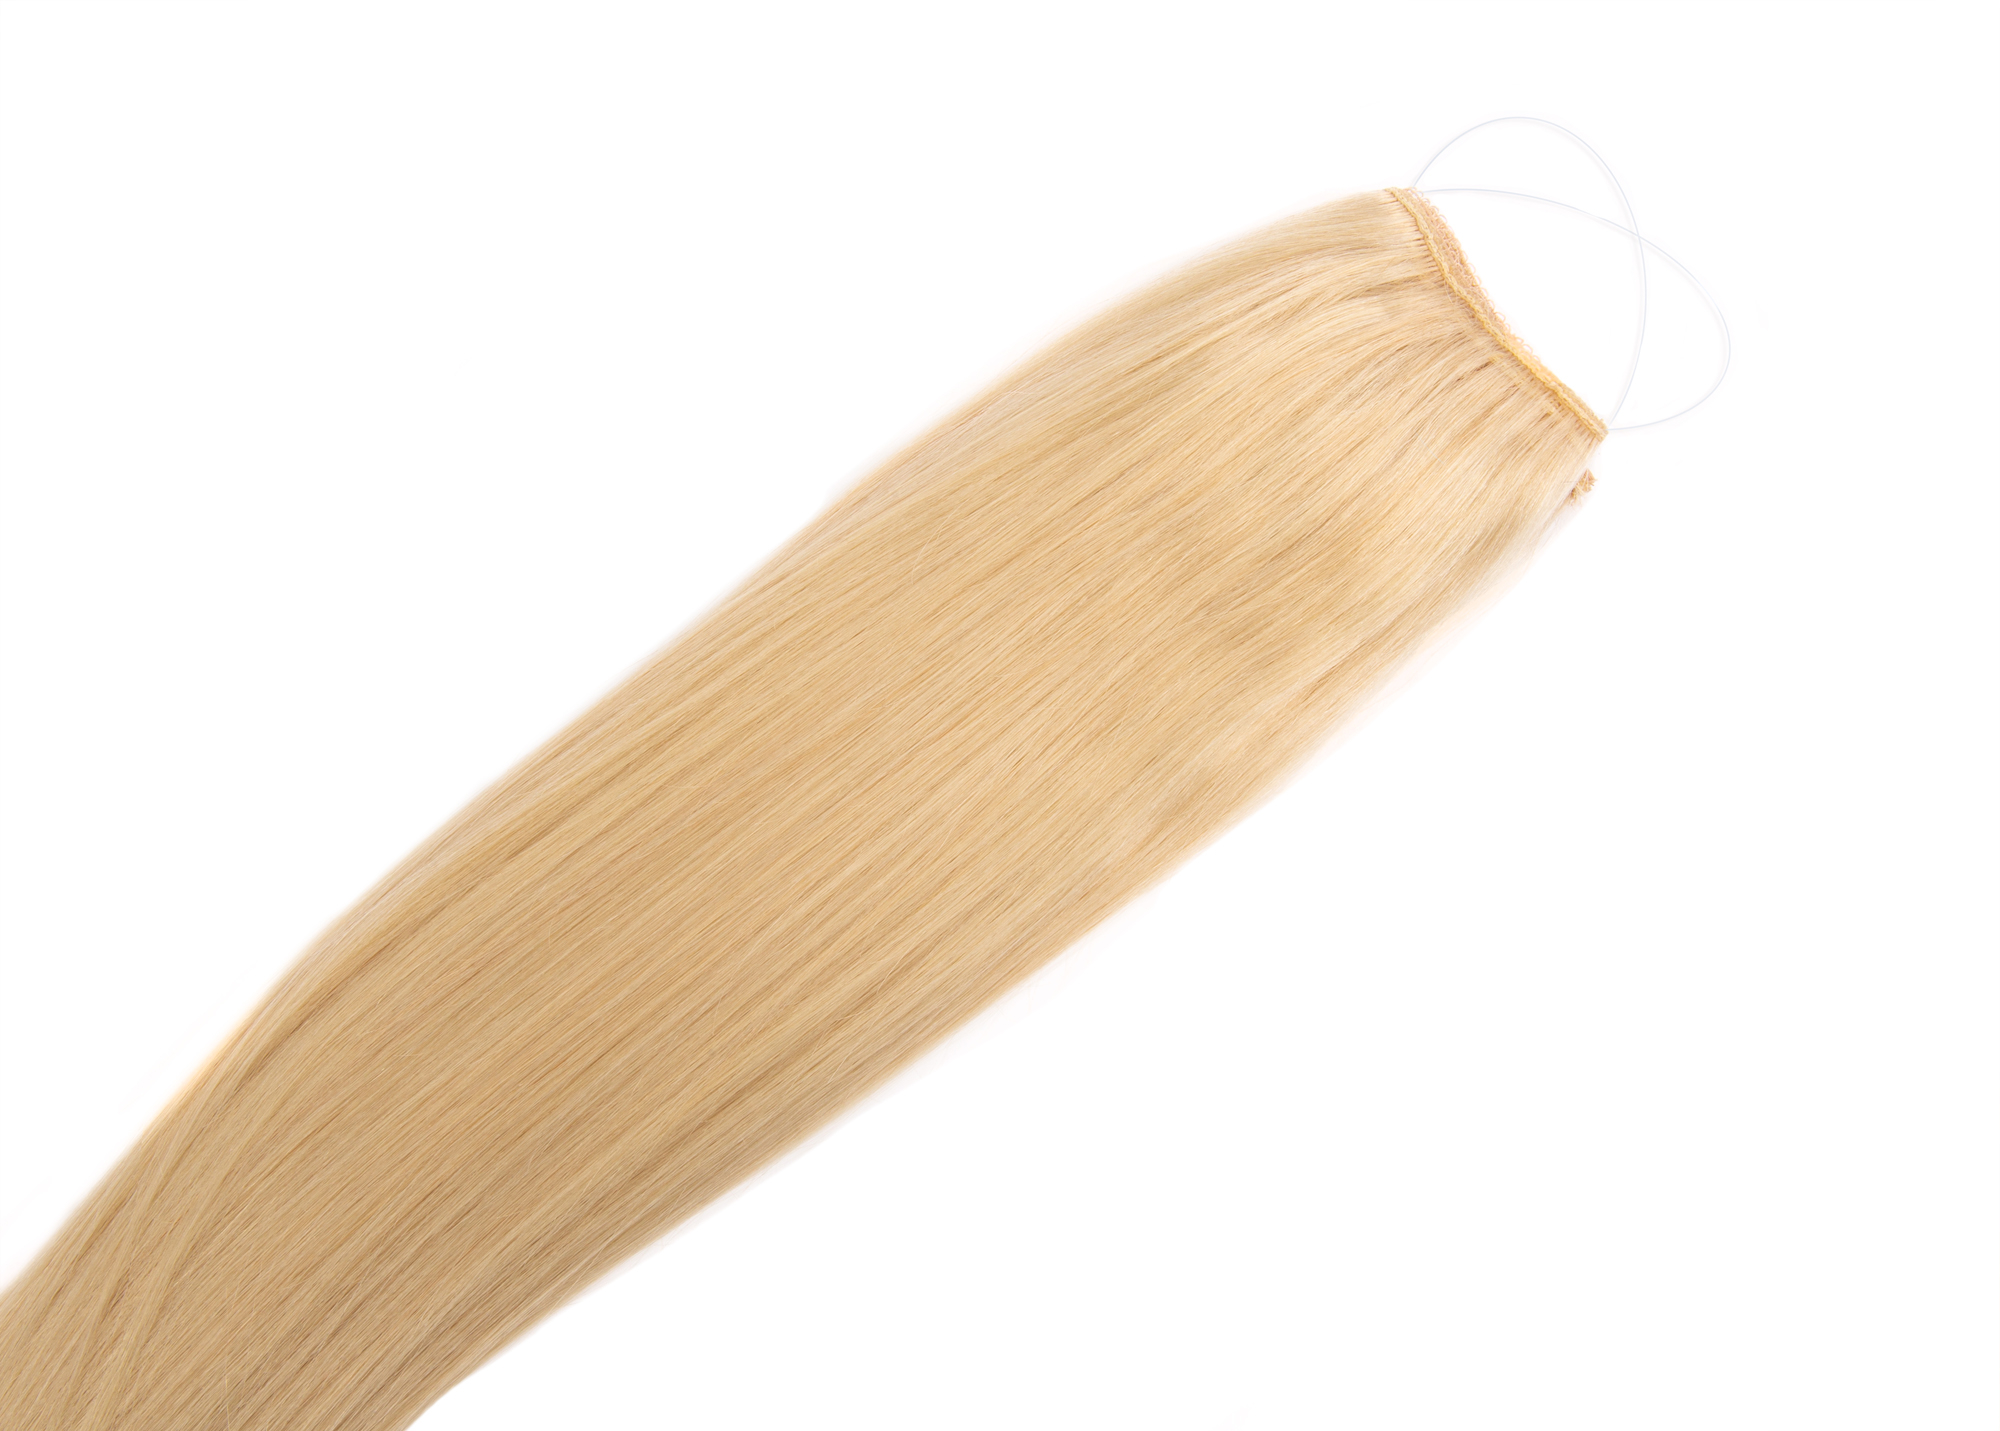 3. "How to Achieve the Perfect Blonde Ombre Look" - wide 9